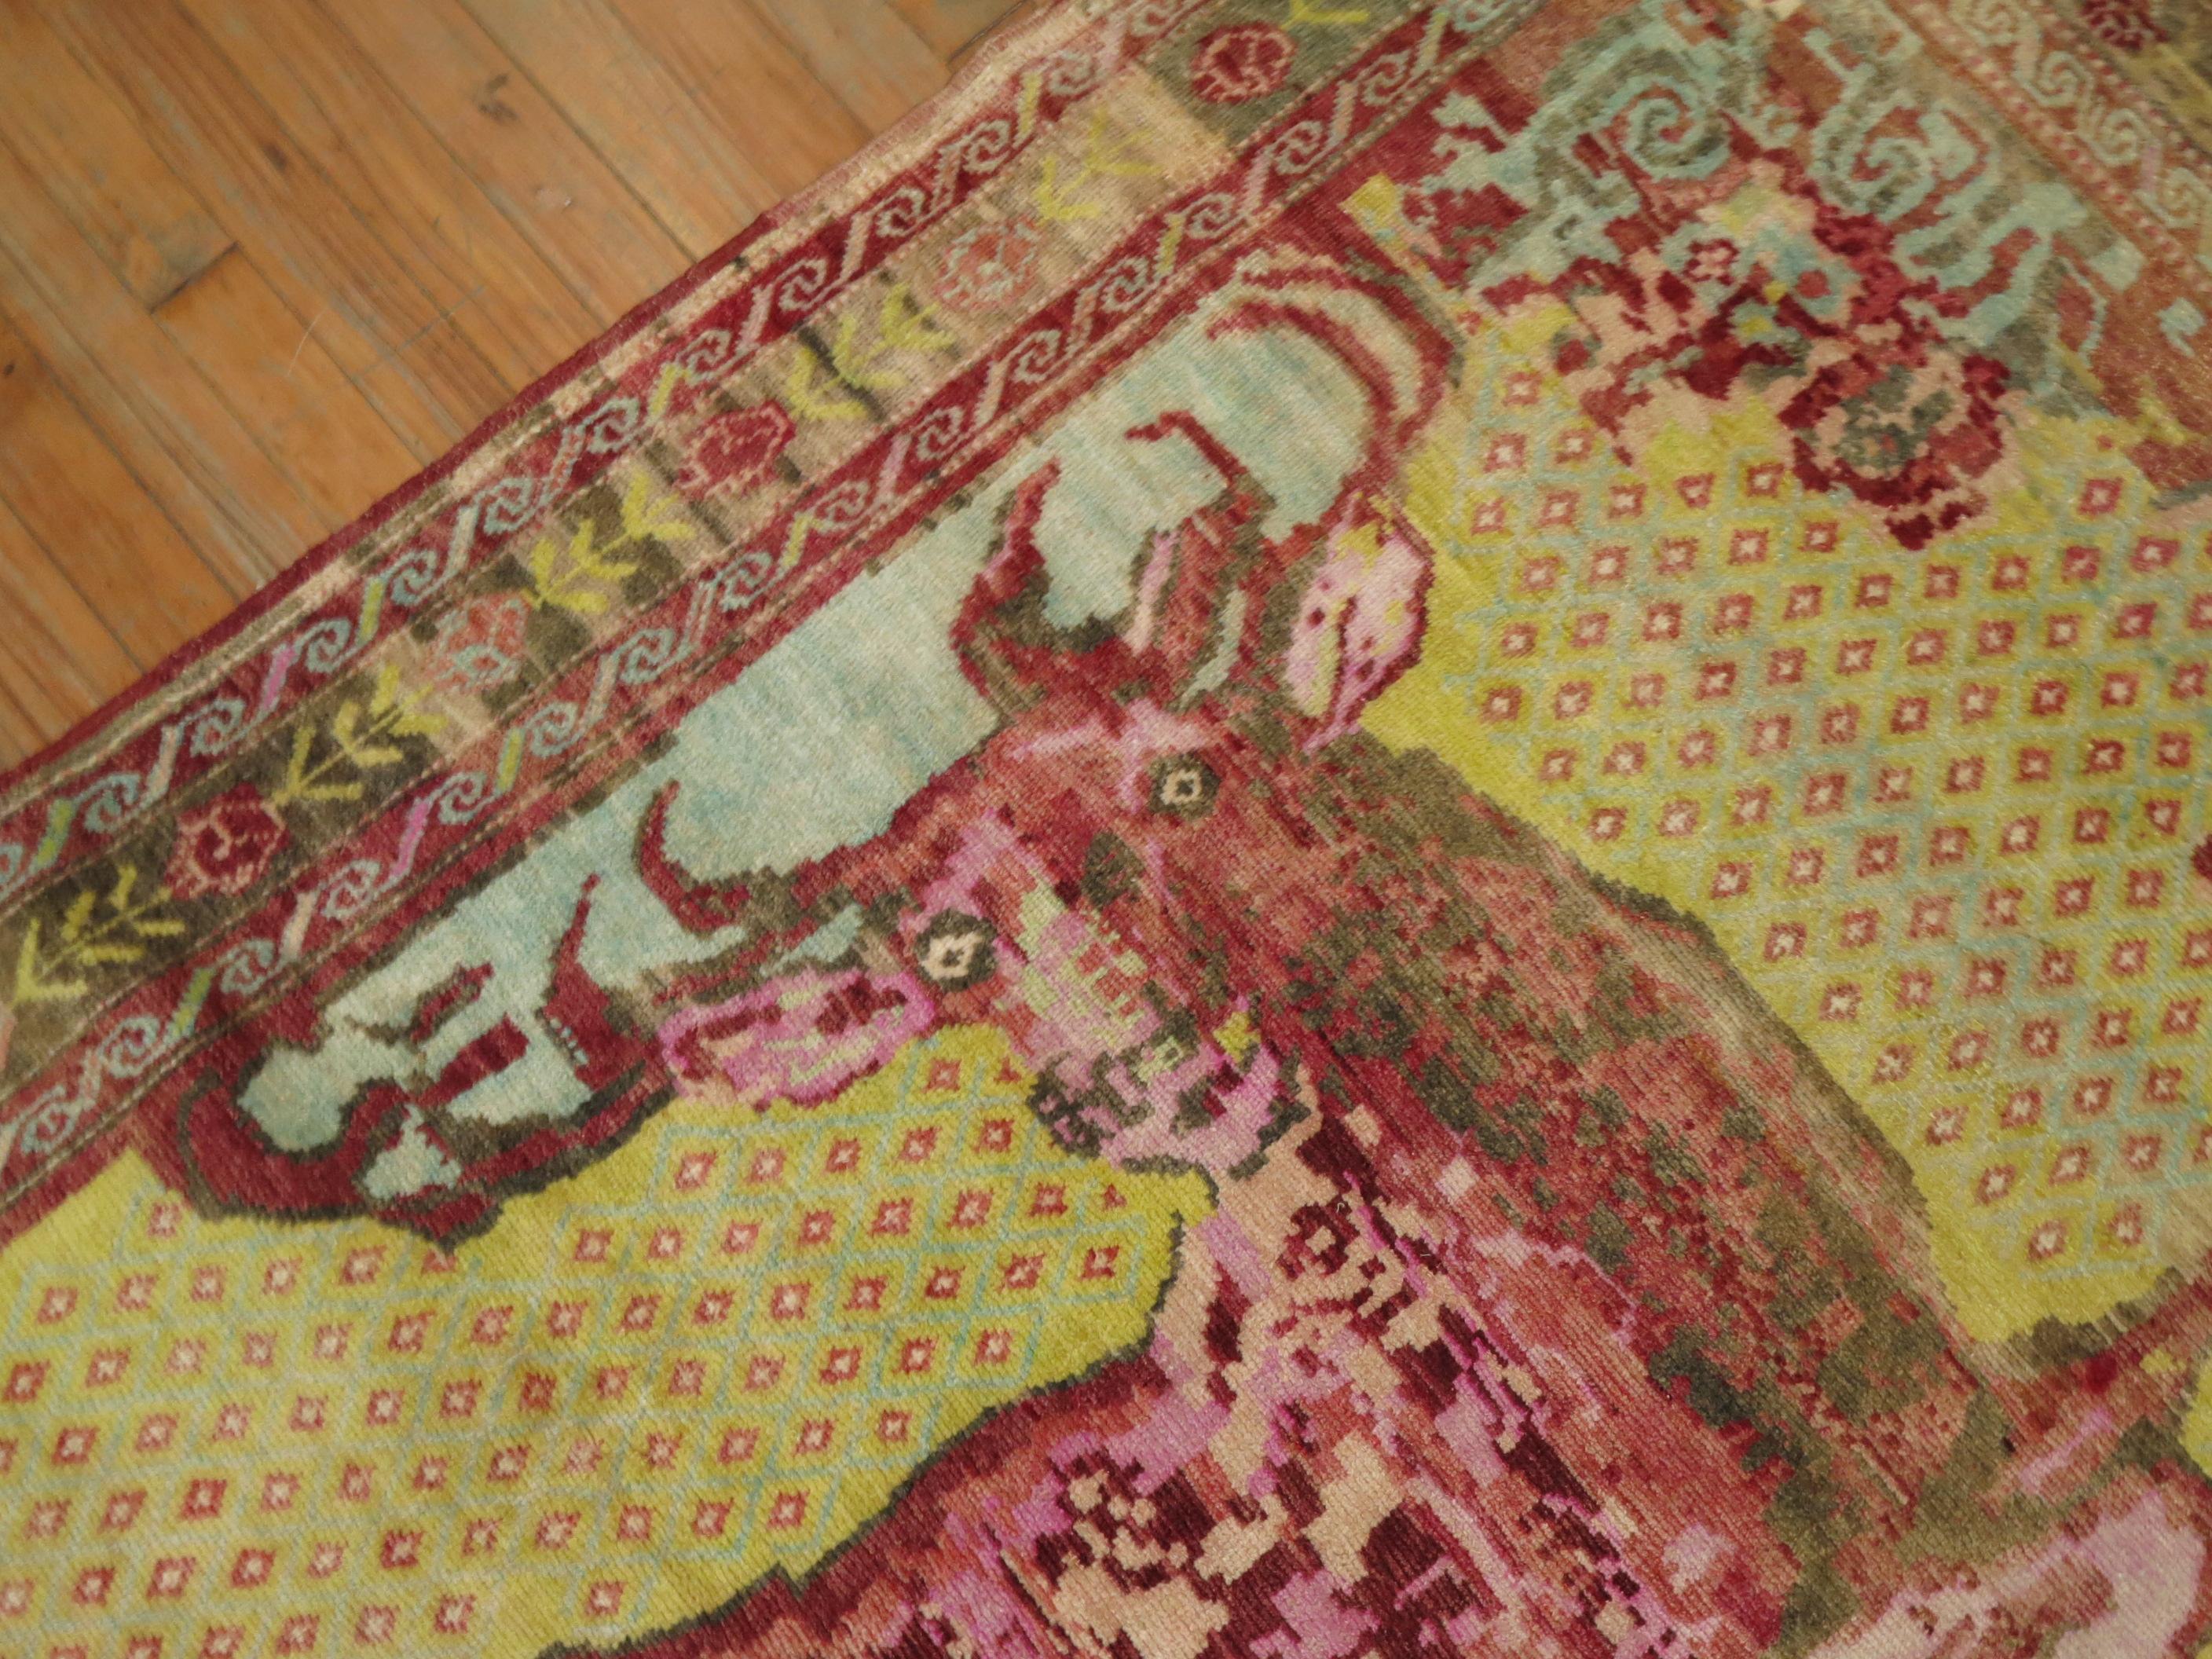 An early 20th century Russian Karabagh pictorial rug depicting a pleasant deer on a mustard yellow ground

Measures: 4'1'' x 7'9''.